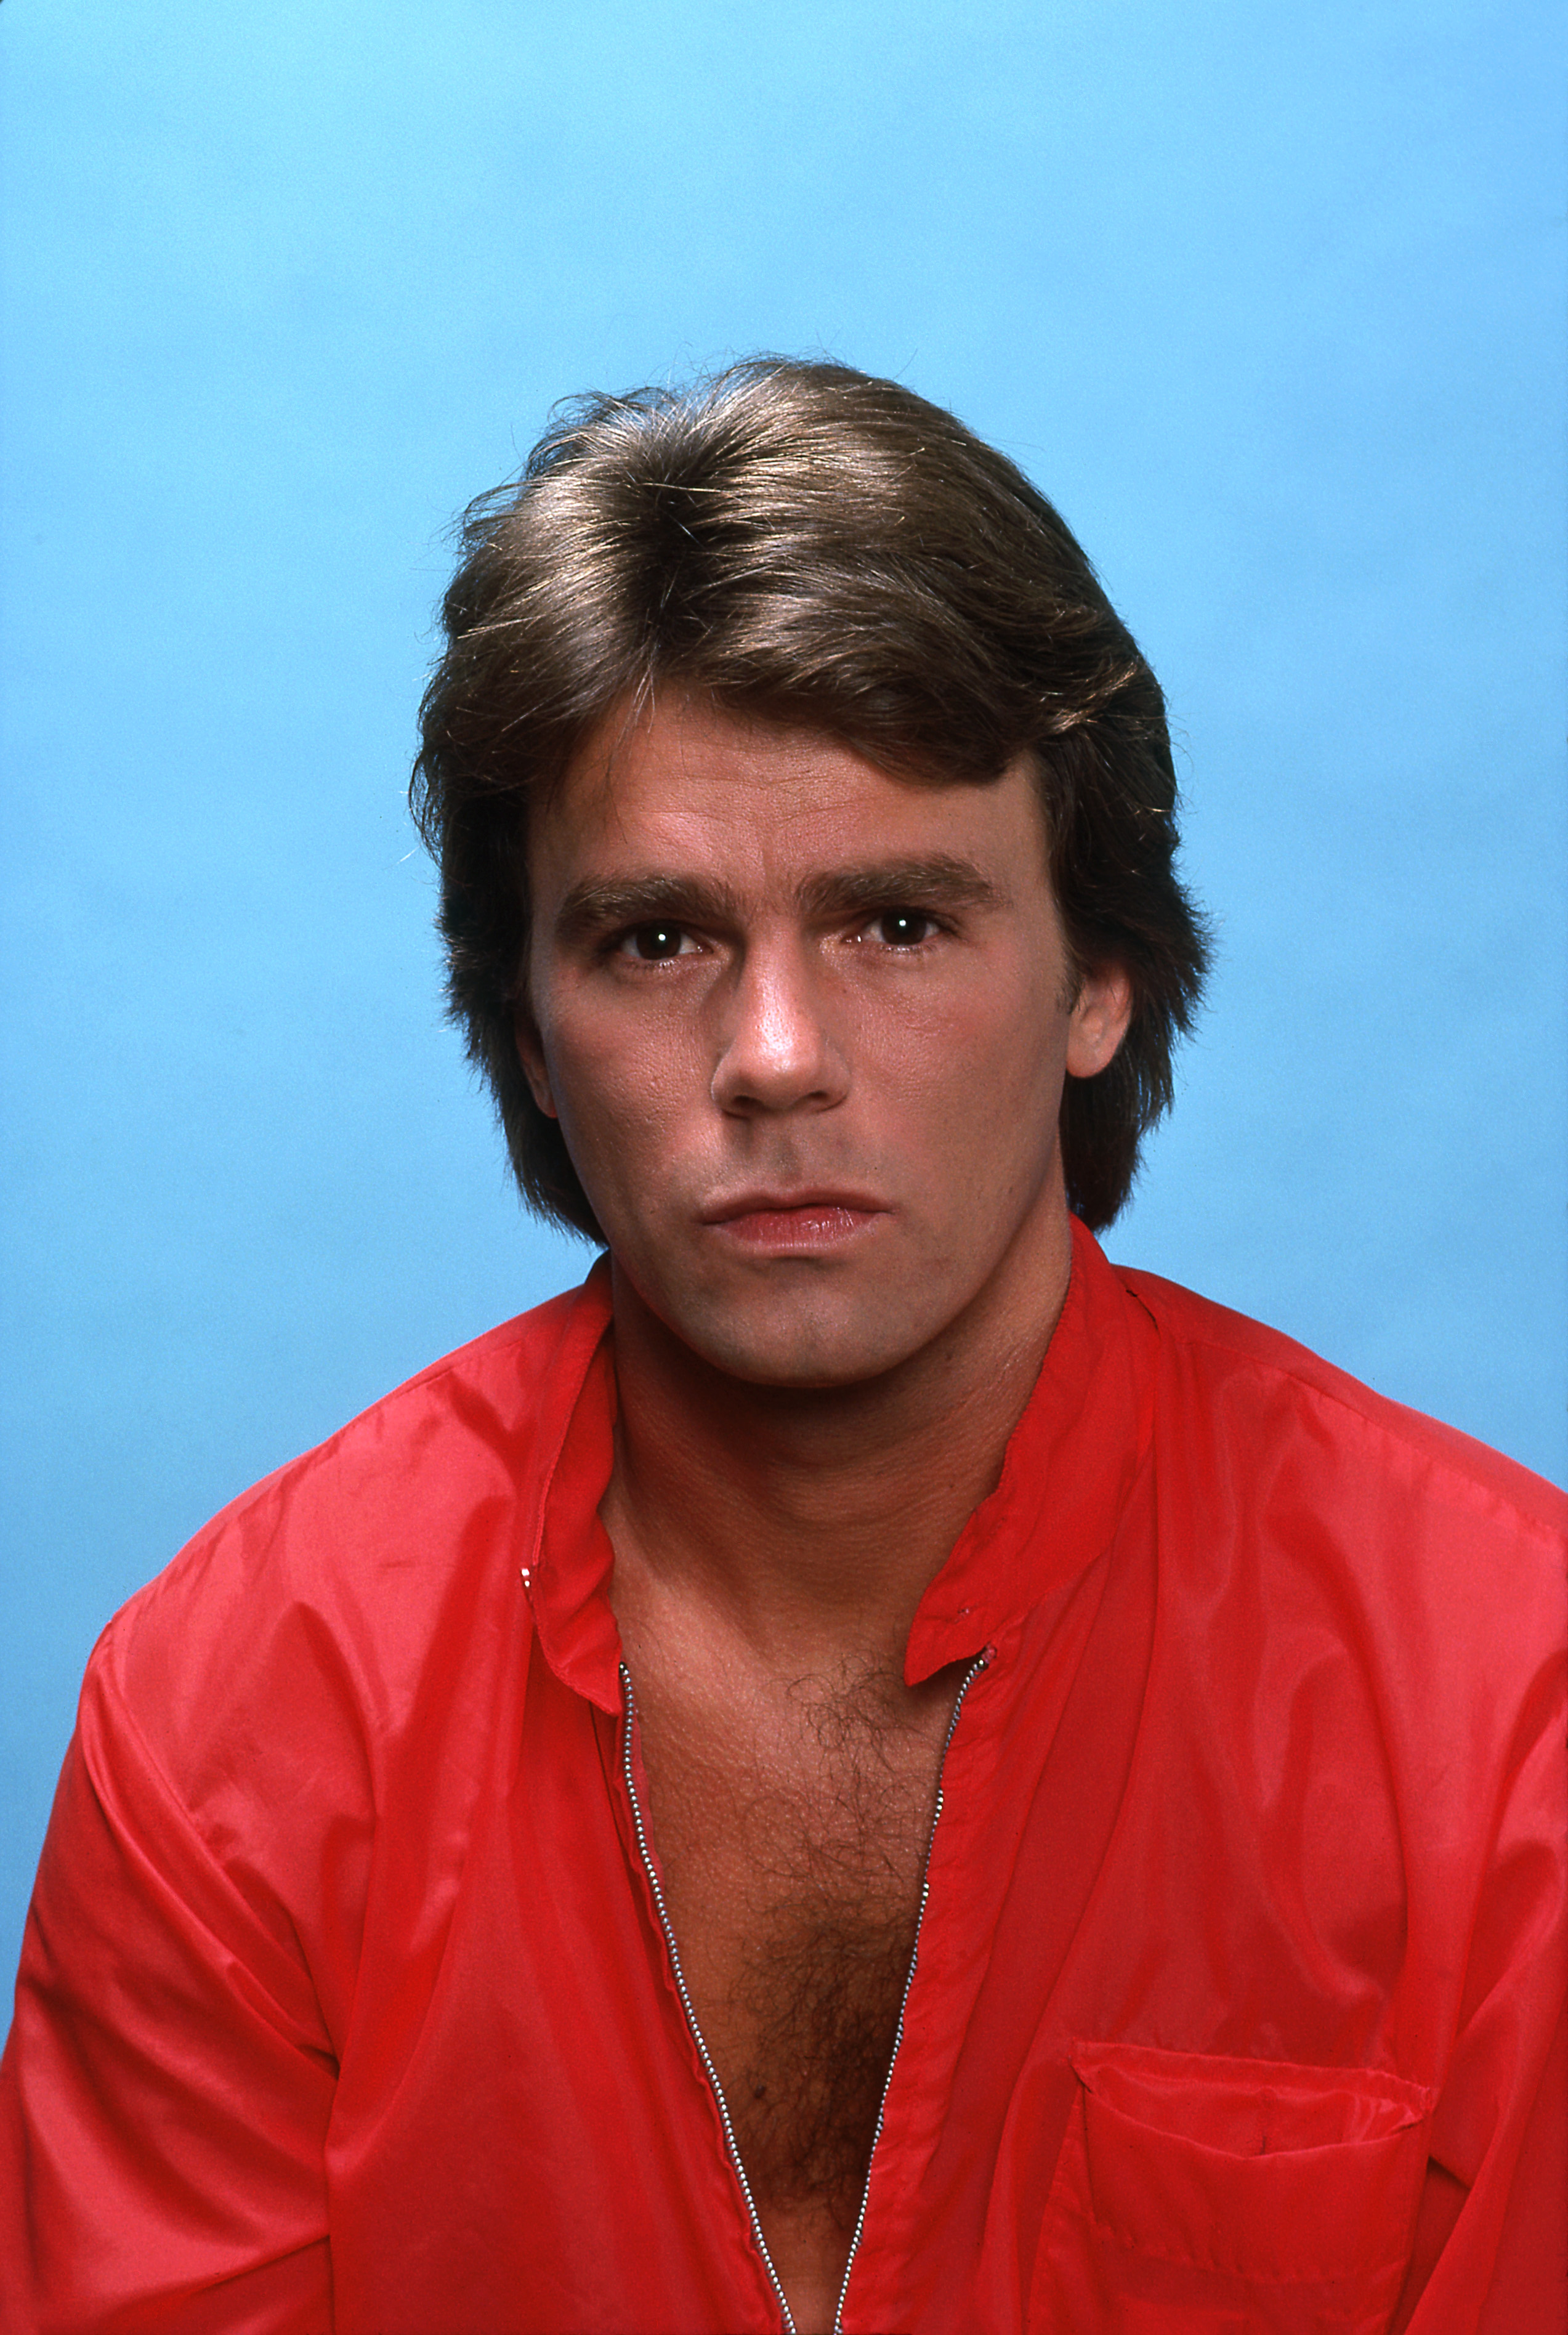 Richard Dean Anderson "General Hospital" promotional photo taken in 1979. | Source: Getty Images